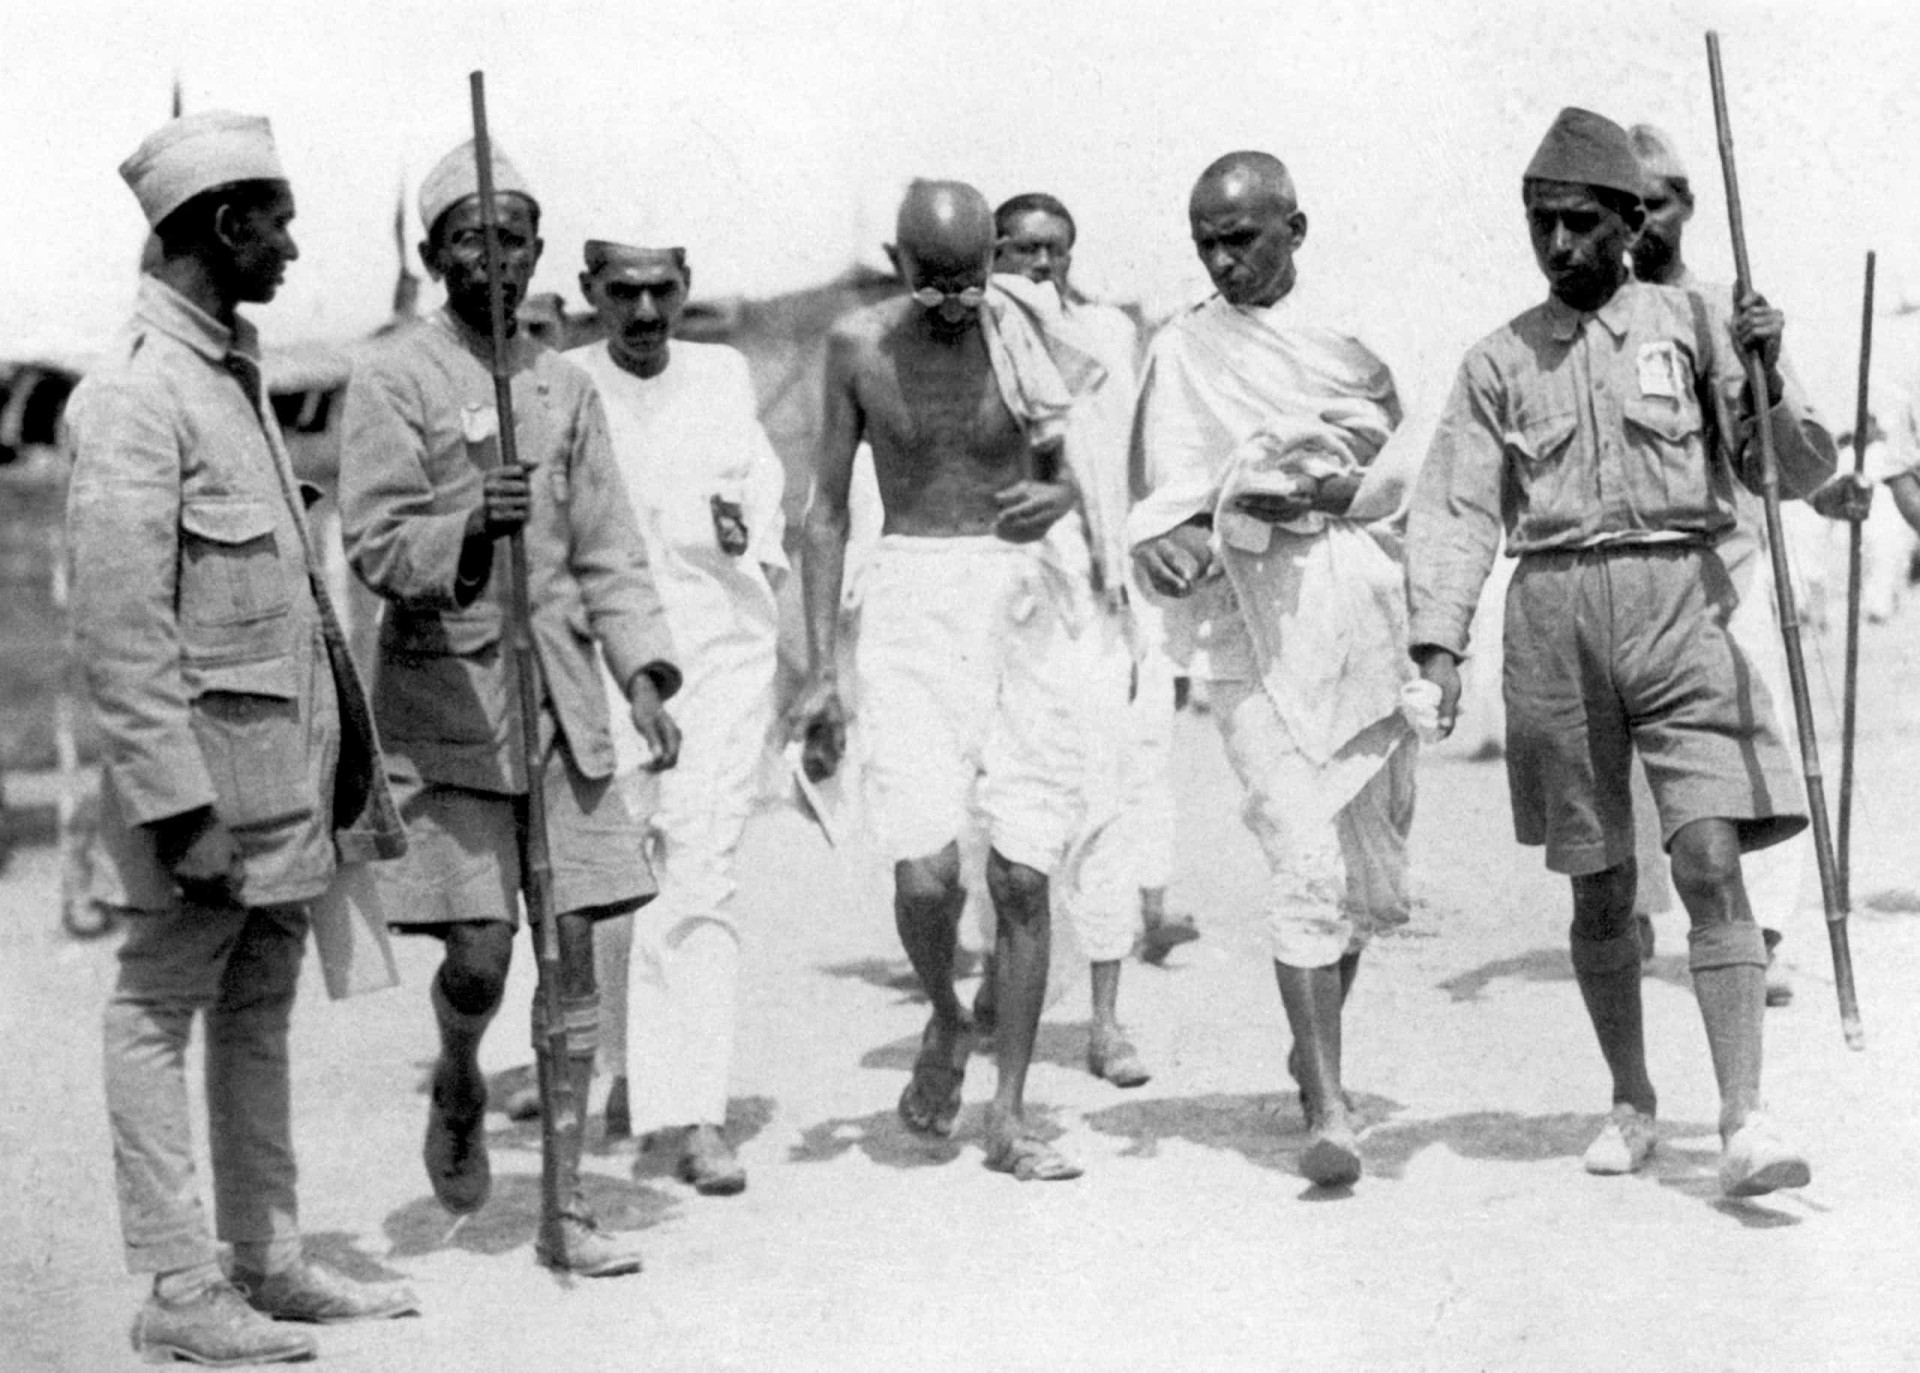 <p>Gandhi is photographed upon his release from prison in Poona, walking with some of his followers in 1918. Gandhi had by now adopted the loin-cloth as a symbol of his identification with India's poor. The following year, British authorities passed the Rowlatt Act, which gave powers to the police to arrest any person without any reason whatsoever. Gandhi responded by appealing to Indians to start civil disobedience.  </p><p><a href="https://www.msn.com/en-us/community/channel/vid-7xx8mnucu55yw63we9va2gwr7uihbxwc68fxqp25x6tg4ftibpra?cvid=94631541bc0f4f89bfd59158d696ad7e">Follow us and access great exclusive content every day</a></p>